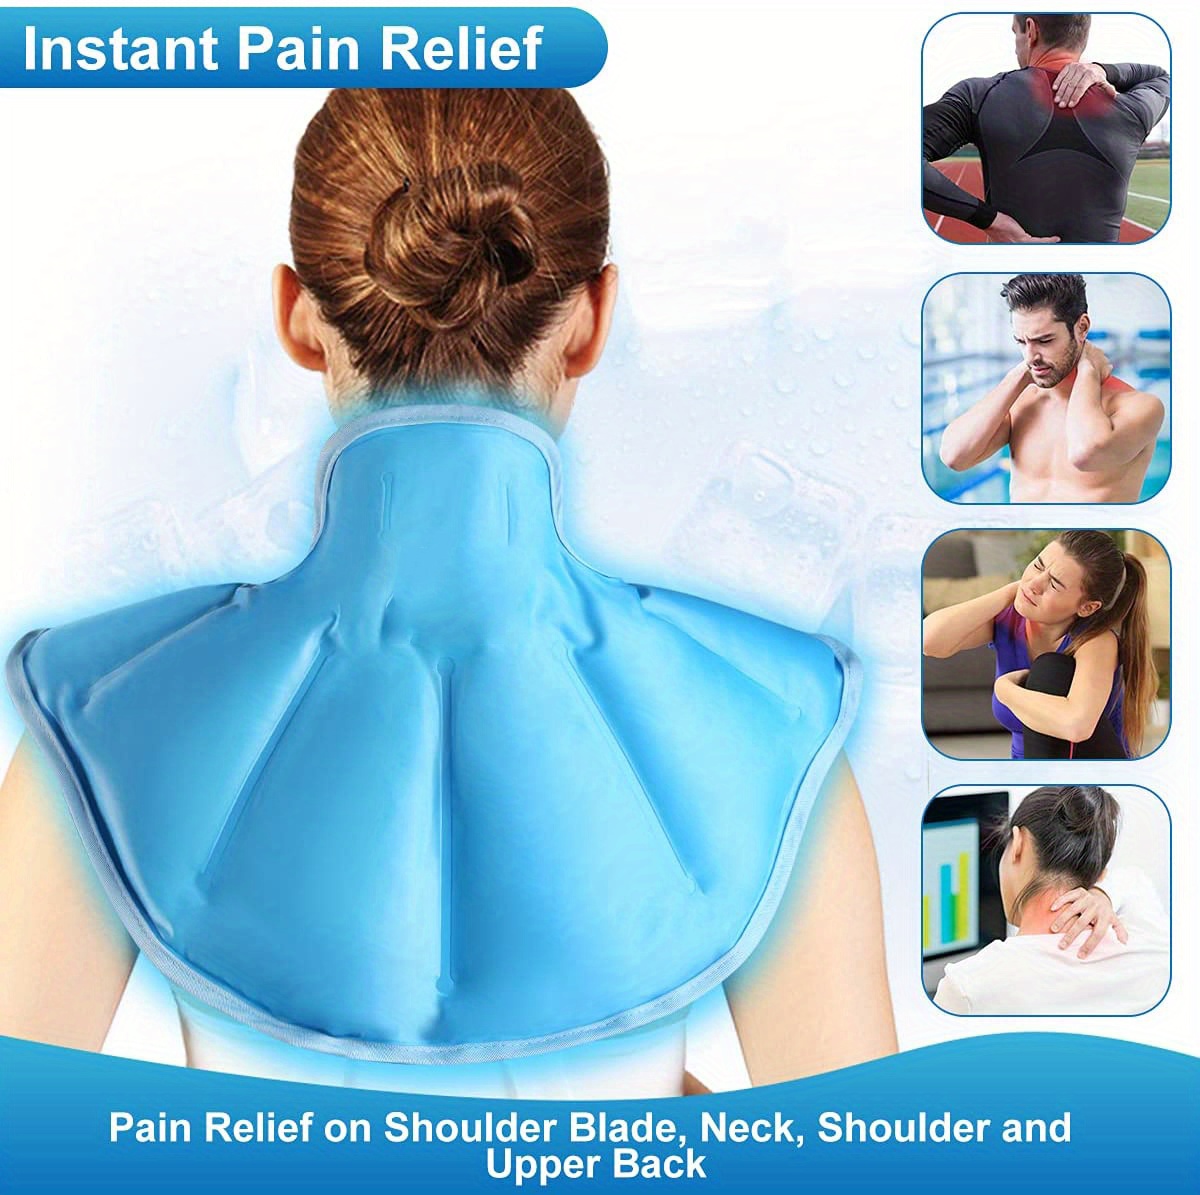 Instant Relief For Upper Back Pain, Neck Pain, and Shoulder Pain